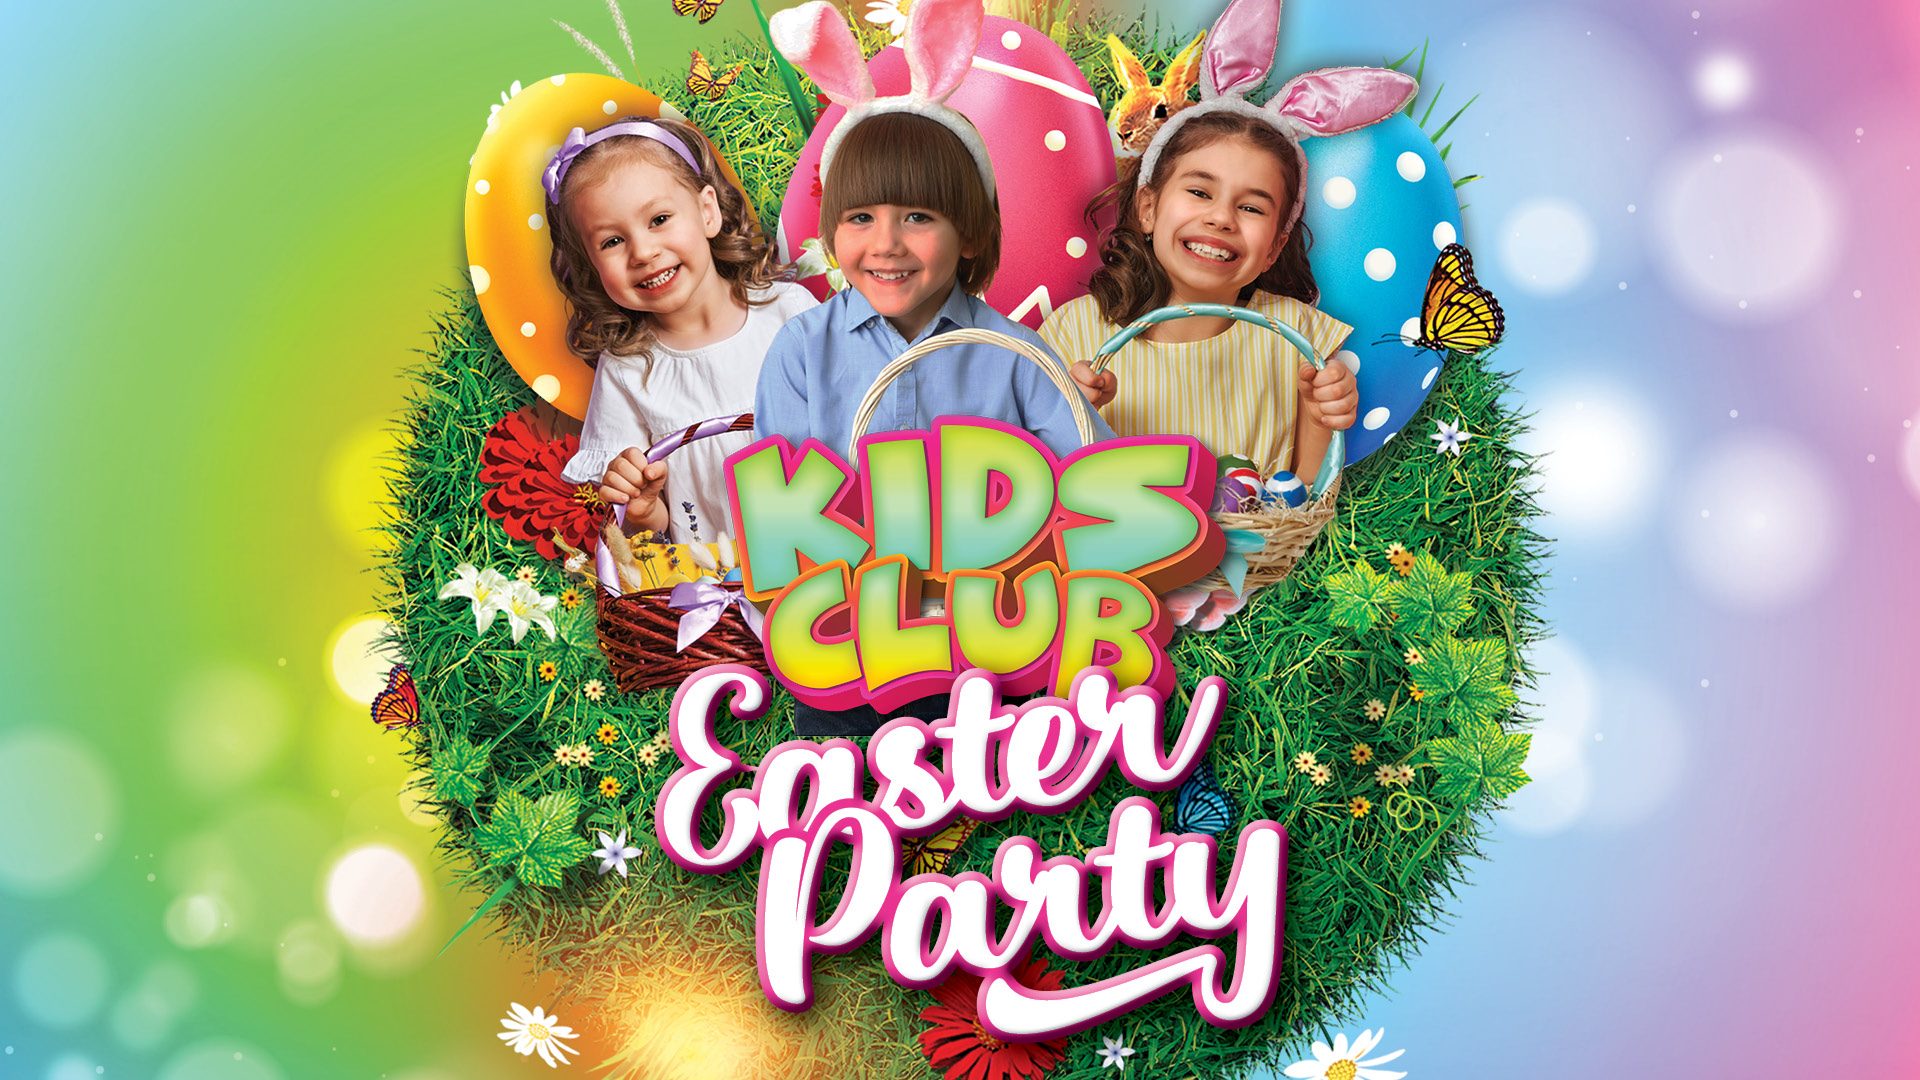 https://www.cabsports.com.au/wp-content/uploads/2022/02/Kids-Club-Easter-Party-Website-Page-Banner-CSC-1920x1080.jpg